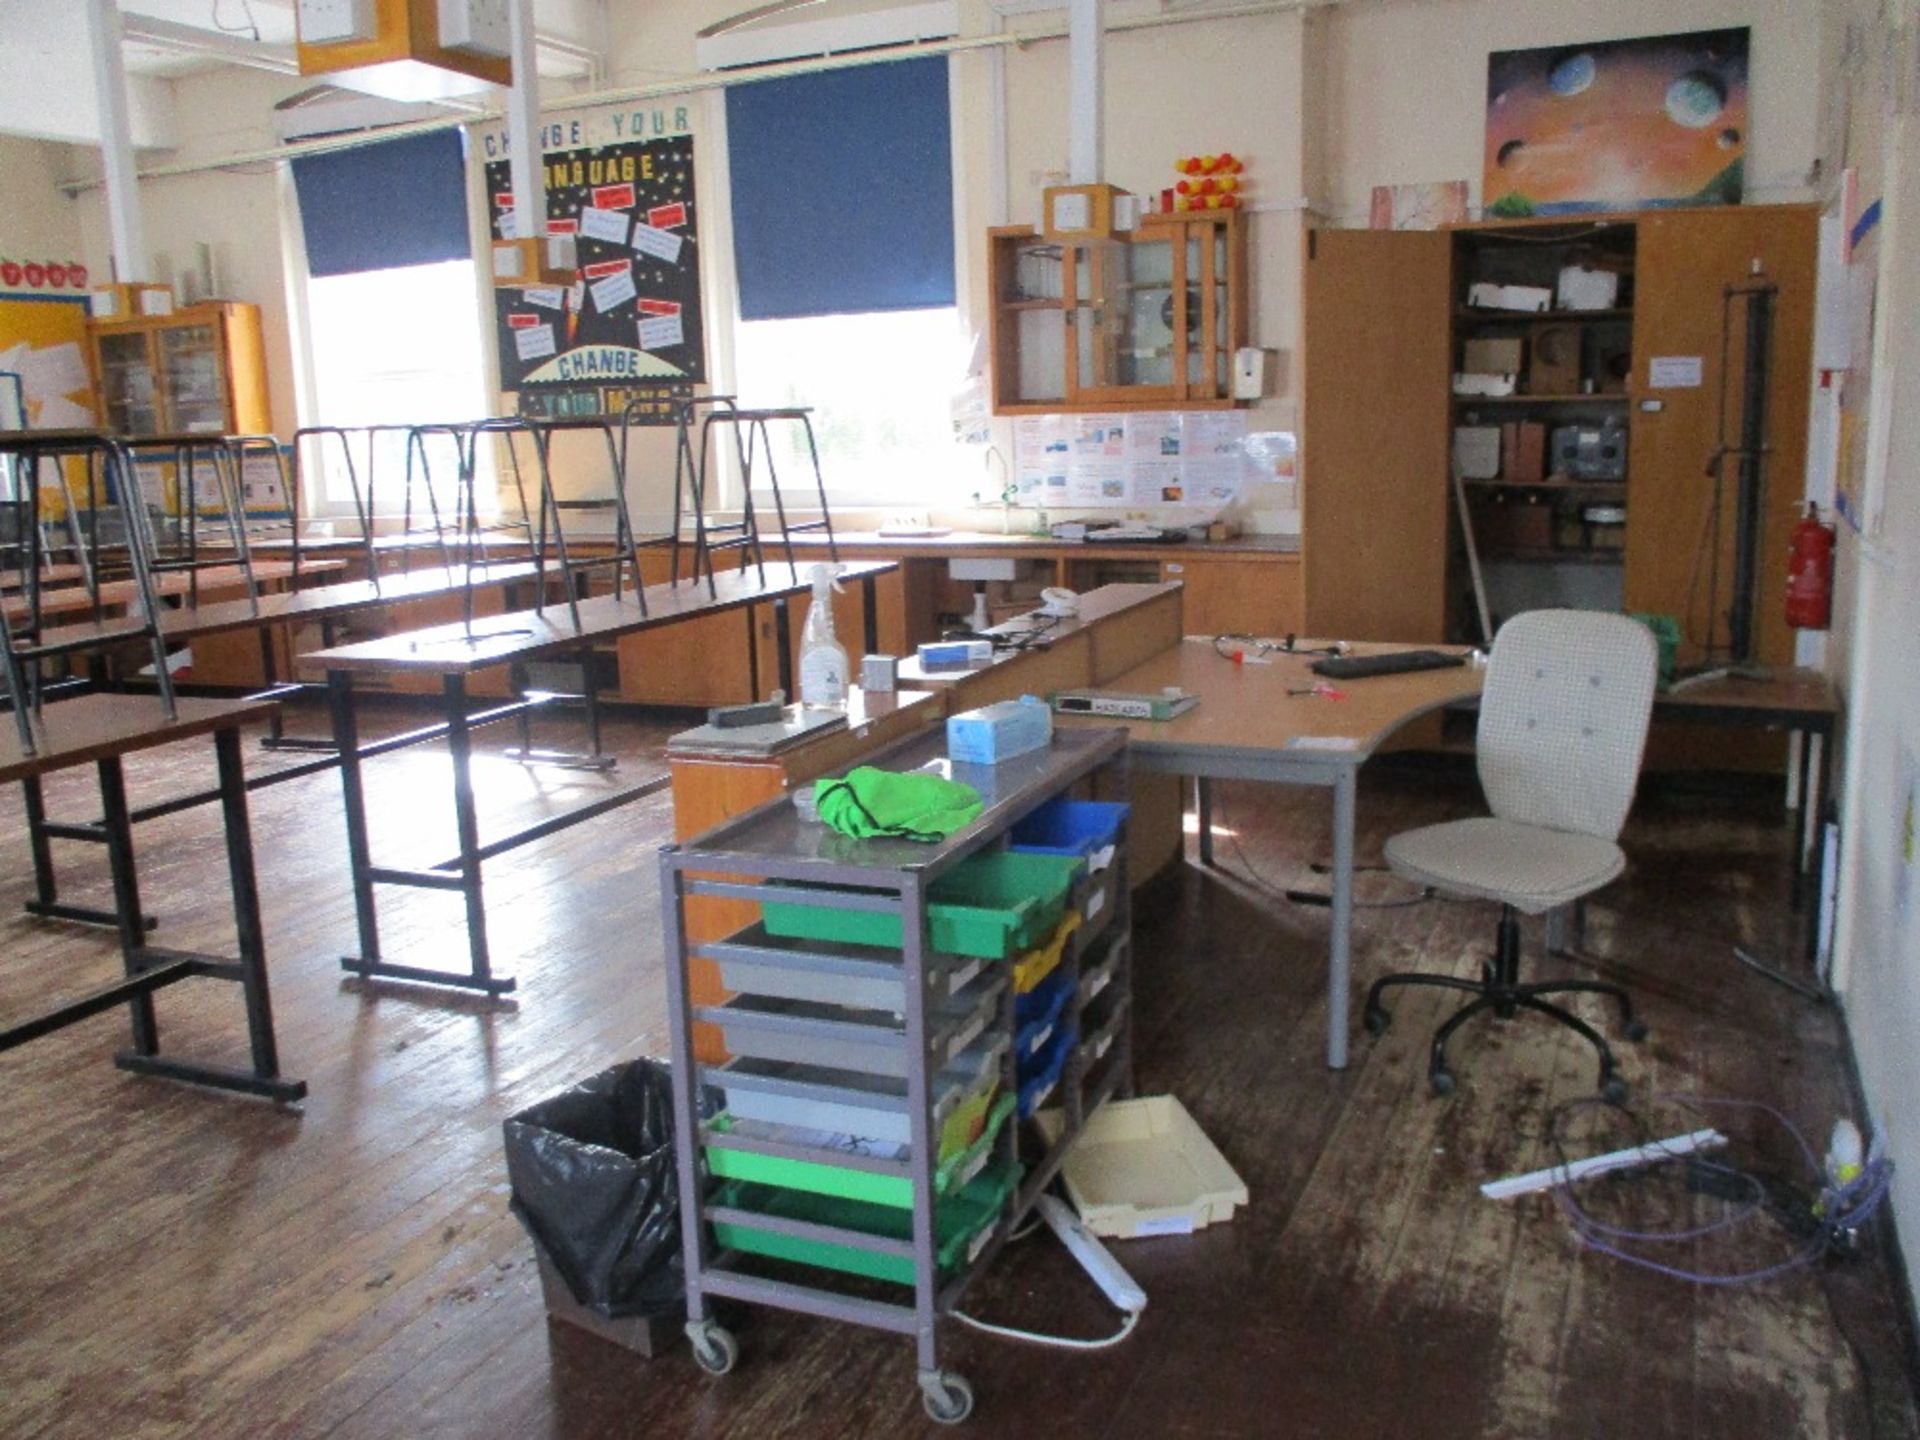 Contents of Classroom - Image 5 of 7